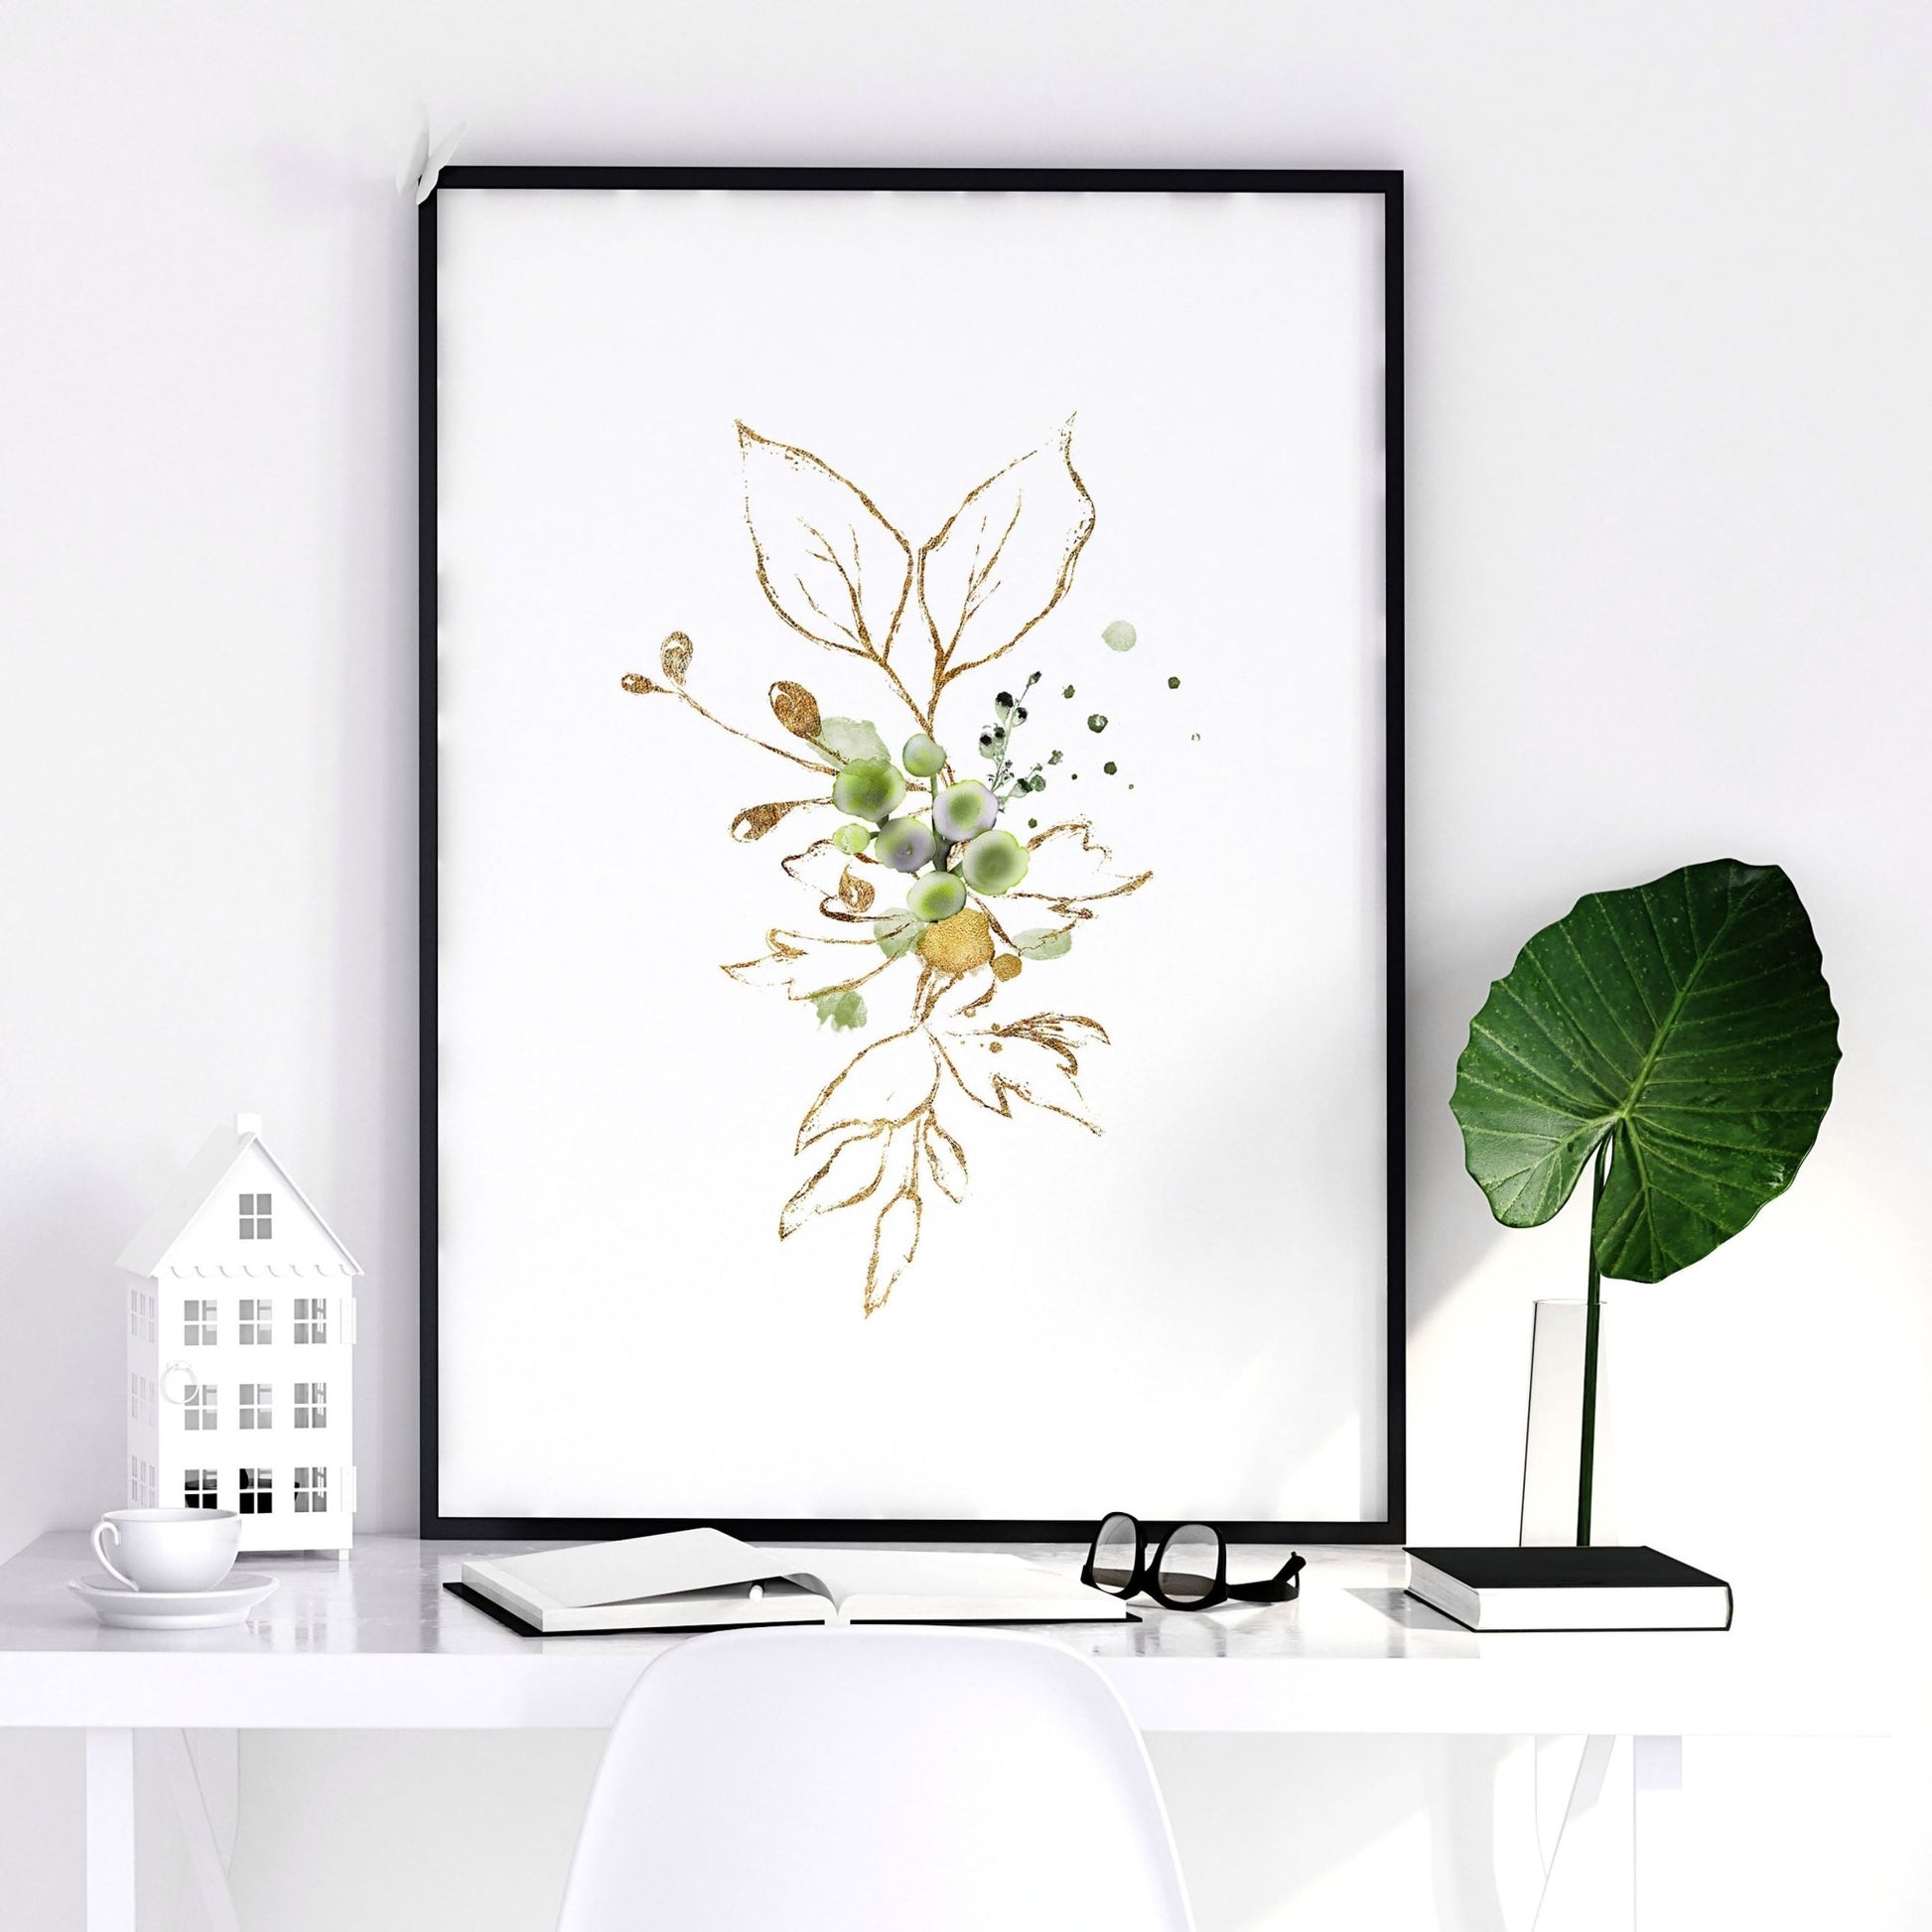 Bedroom decor for walls | set of 3 wall art prints - About Wall Art